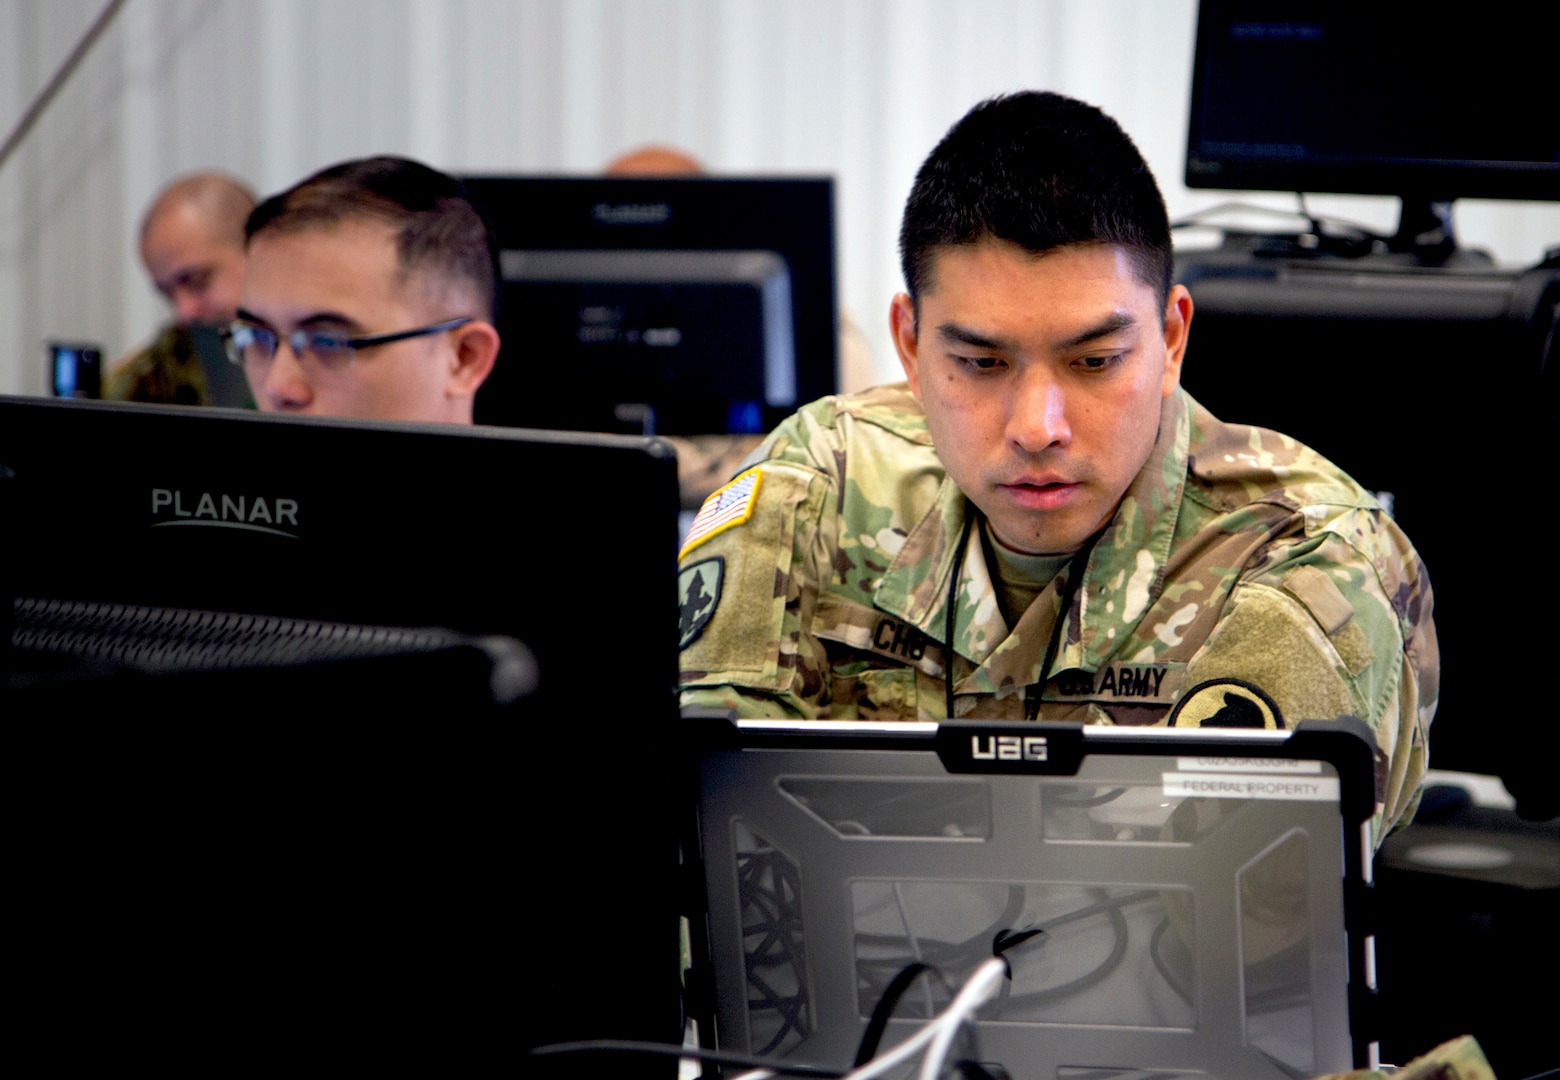 Chief Warrant Officer 3 Brandon Cho with the Hawaii Army National Guard’s Cyber Mission Assurance Team participates in a cyber exercise during Cyber Shield 19 at Camp Atterbury, Indiana, April 6, 2019. Now in its 13th year, the exercise helps prepare National Guard cyber troops to defend critical infrastructure from the growing threat of cyber assaults. This years exercise, Cyber Shield 2020, will be conducted in a virtual environment due to the COVID-19 pandemic.